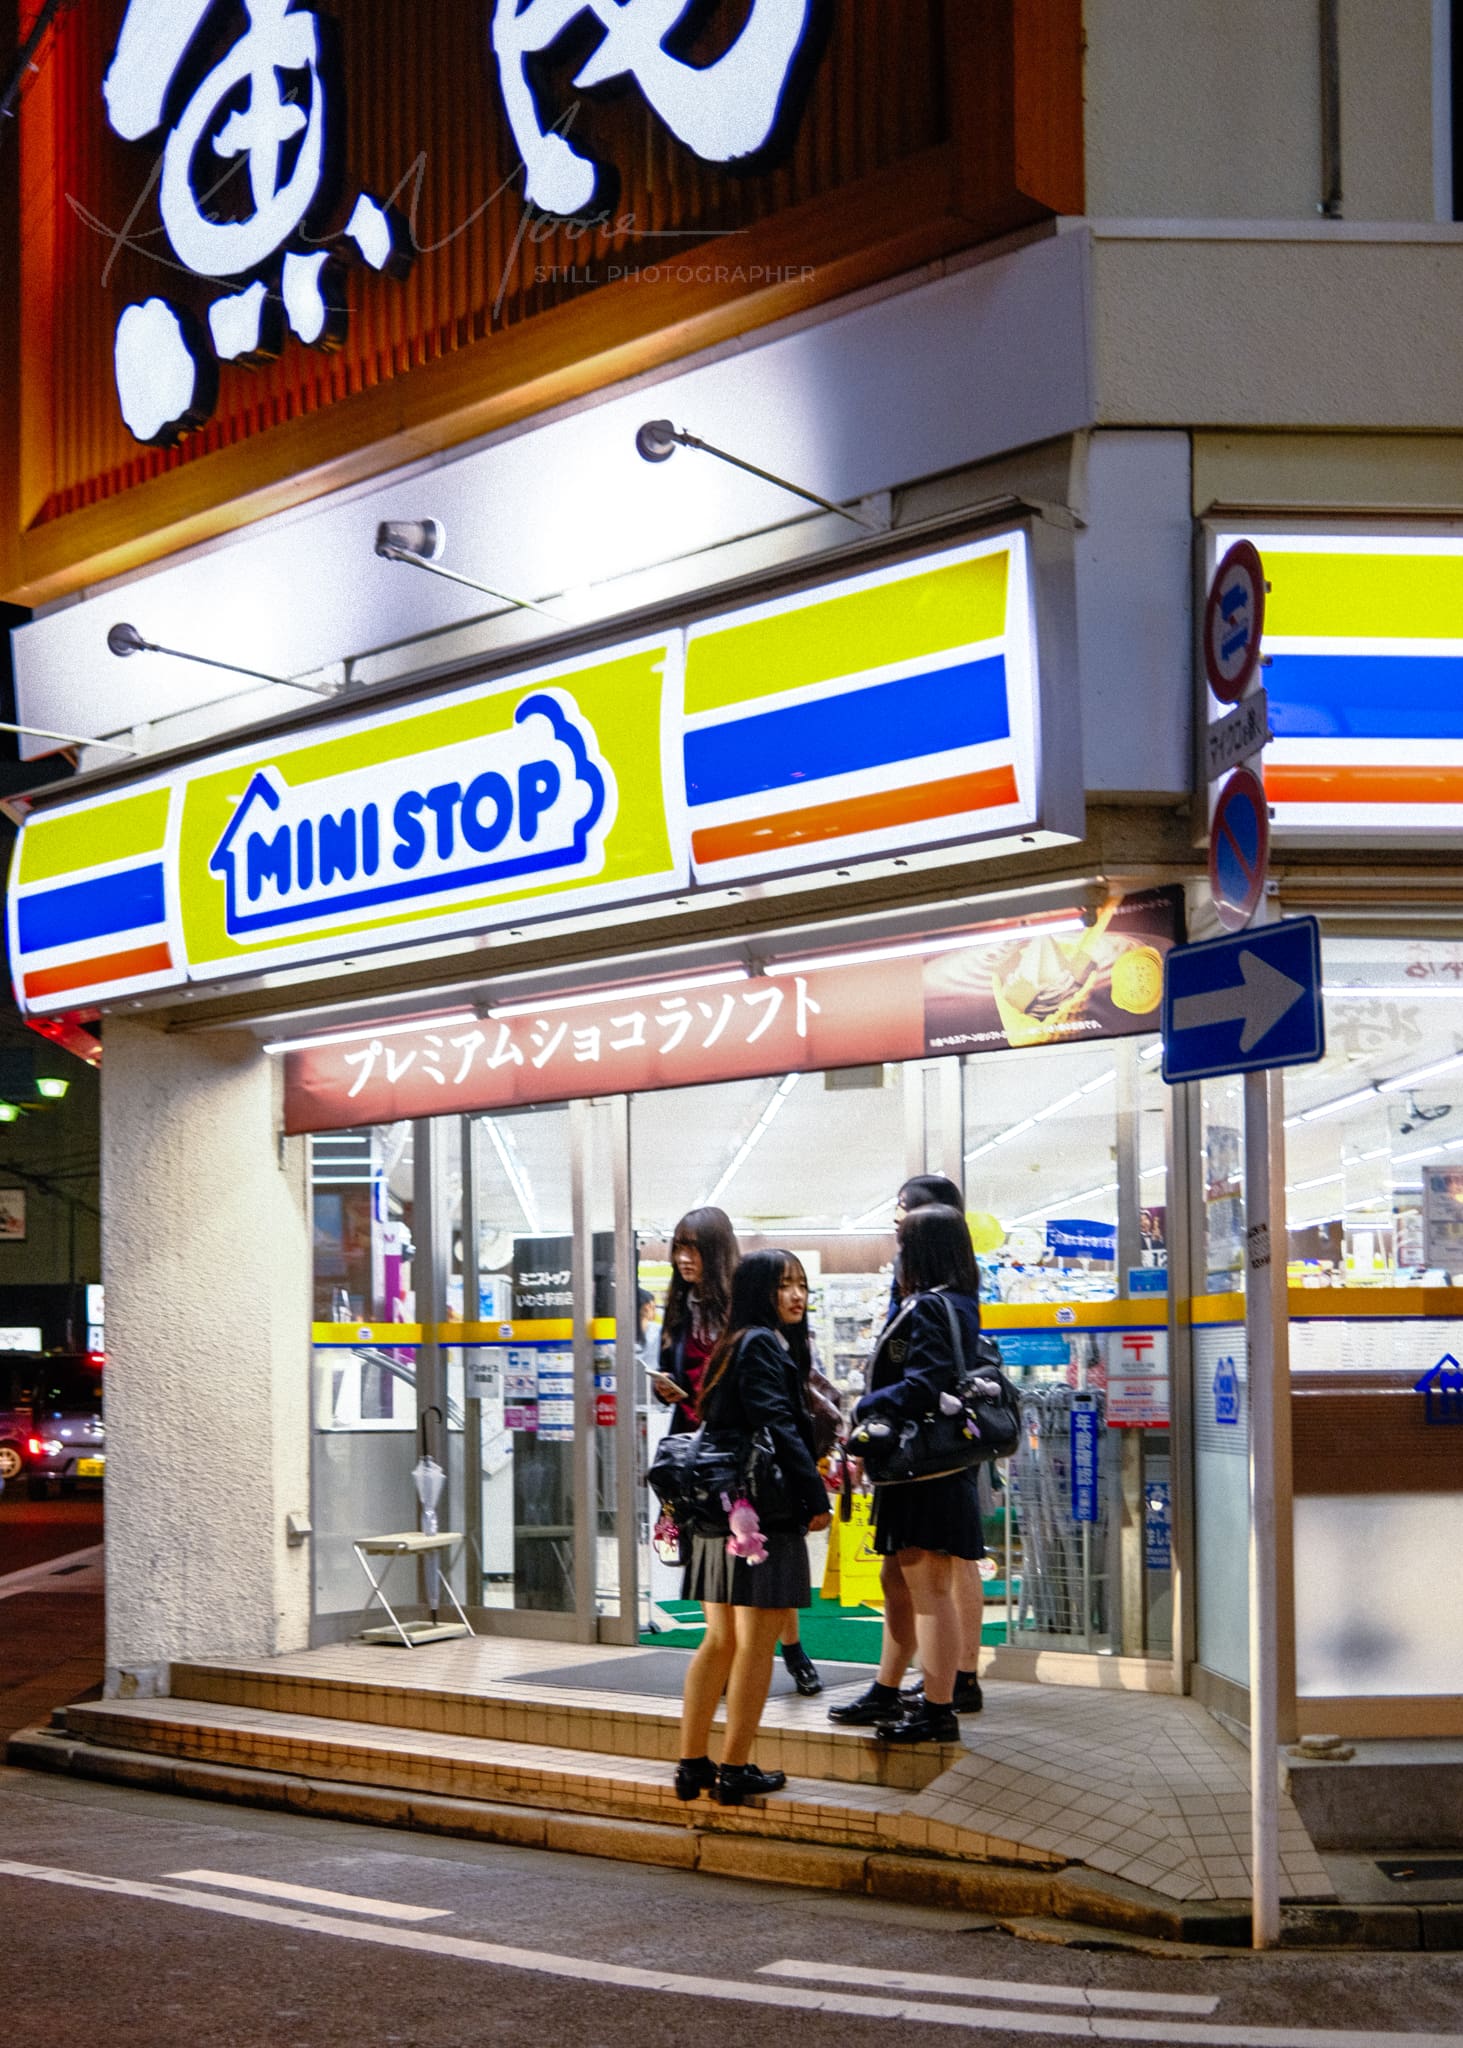 Japanese students at a MINI STOP convenience store during evening.